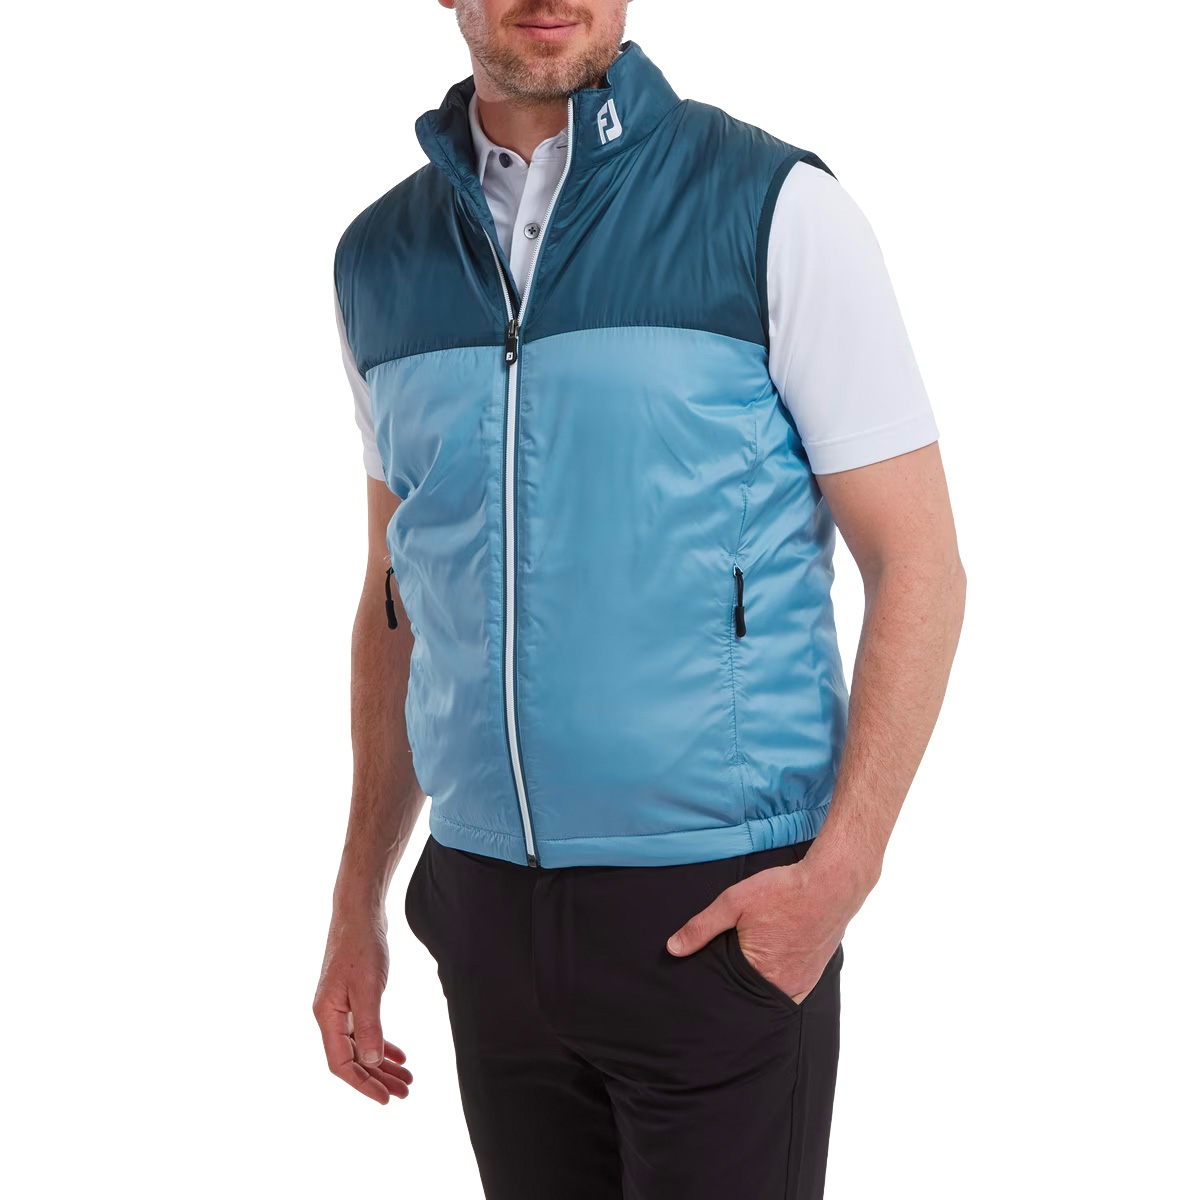 FootJoy Lightweight Thermal Insulated Vest Gilet 